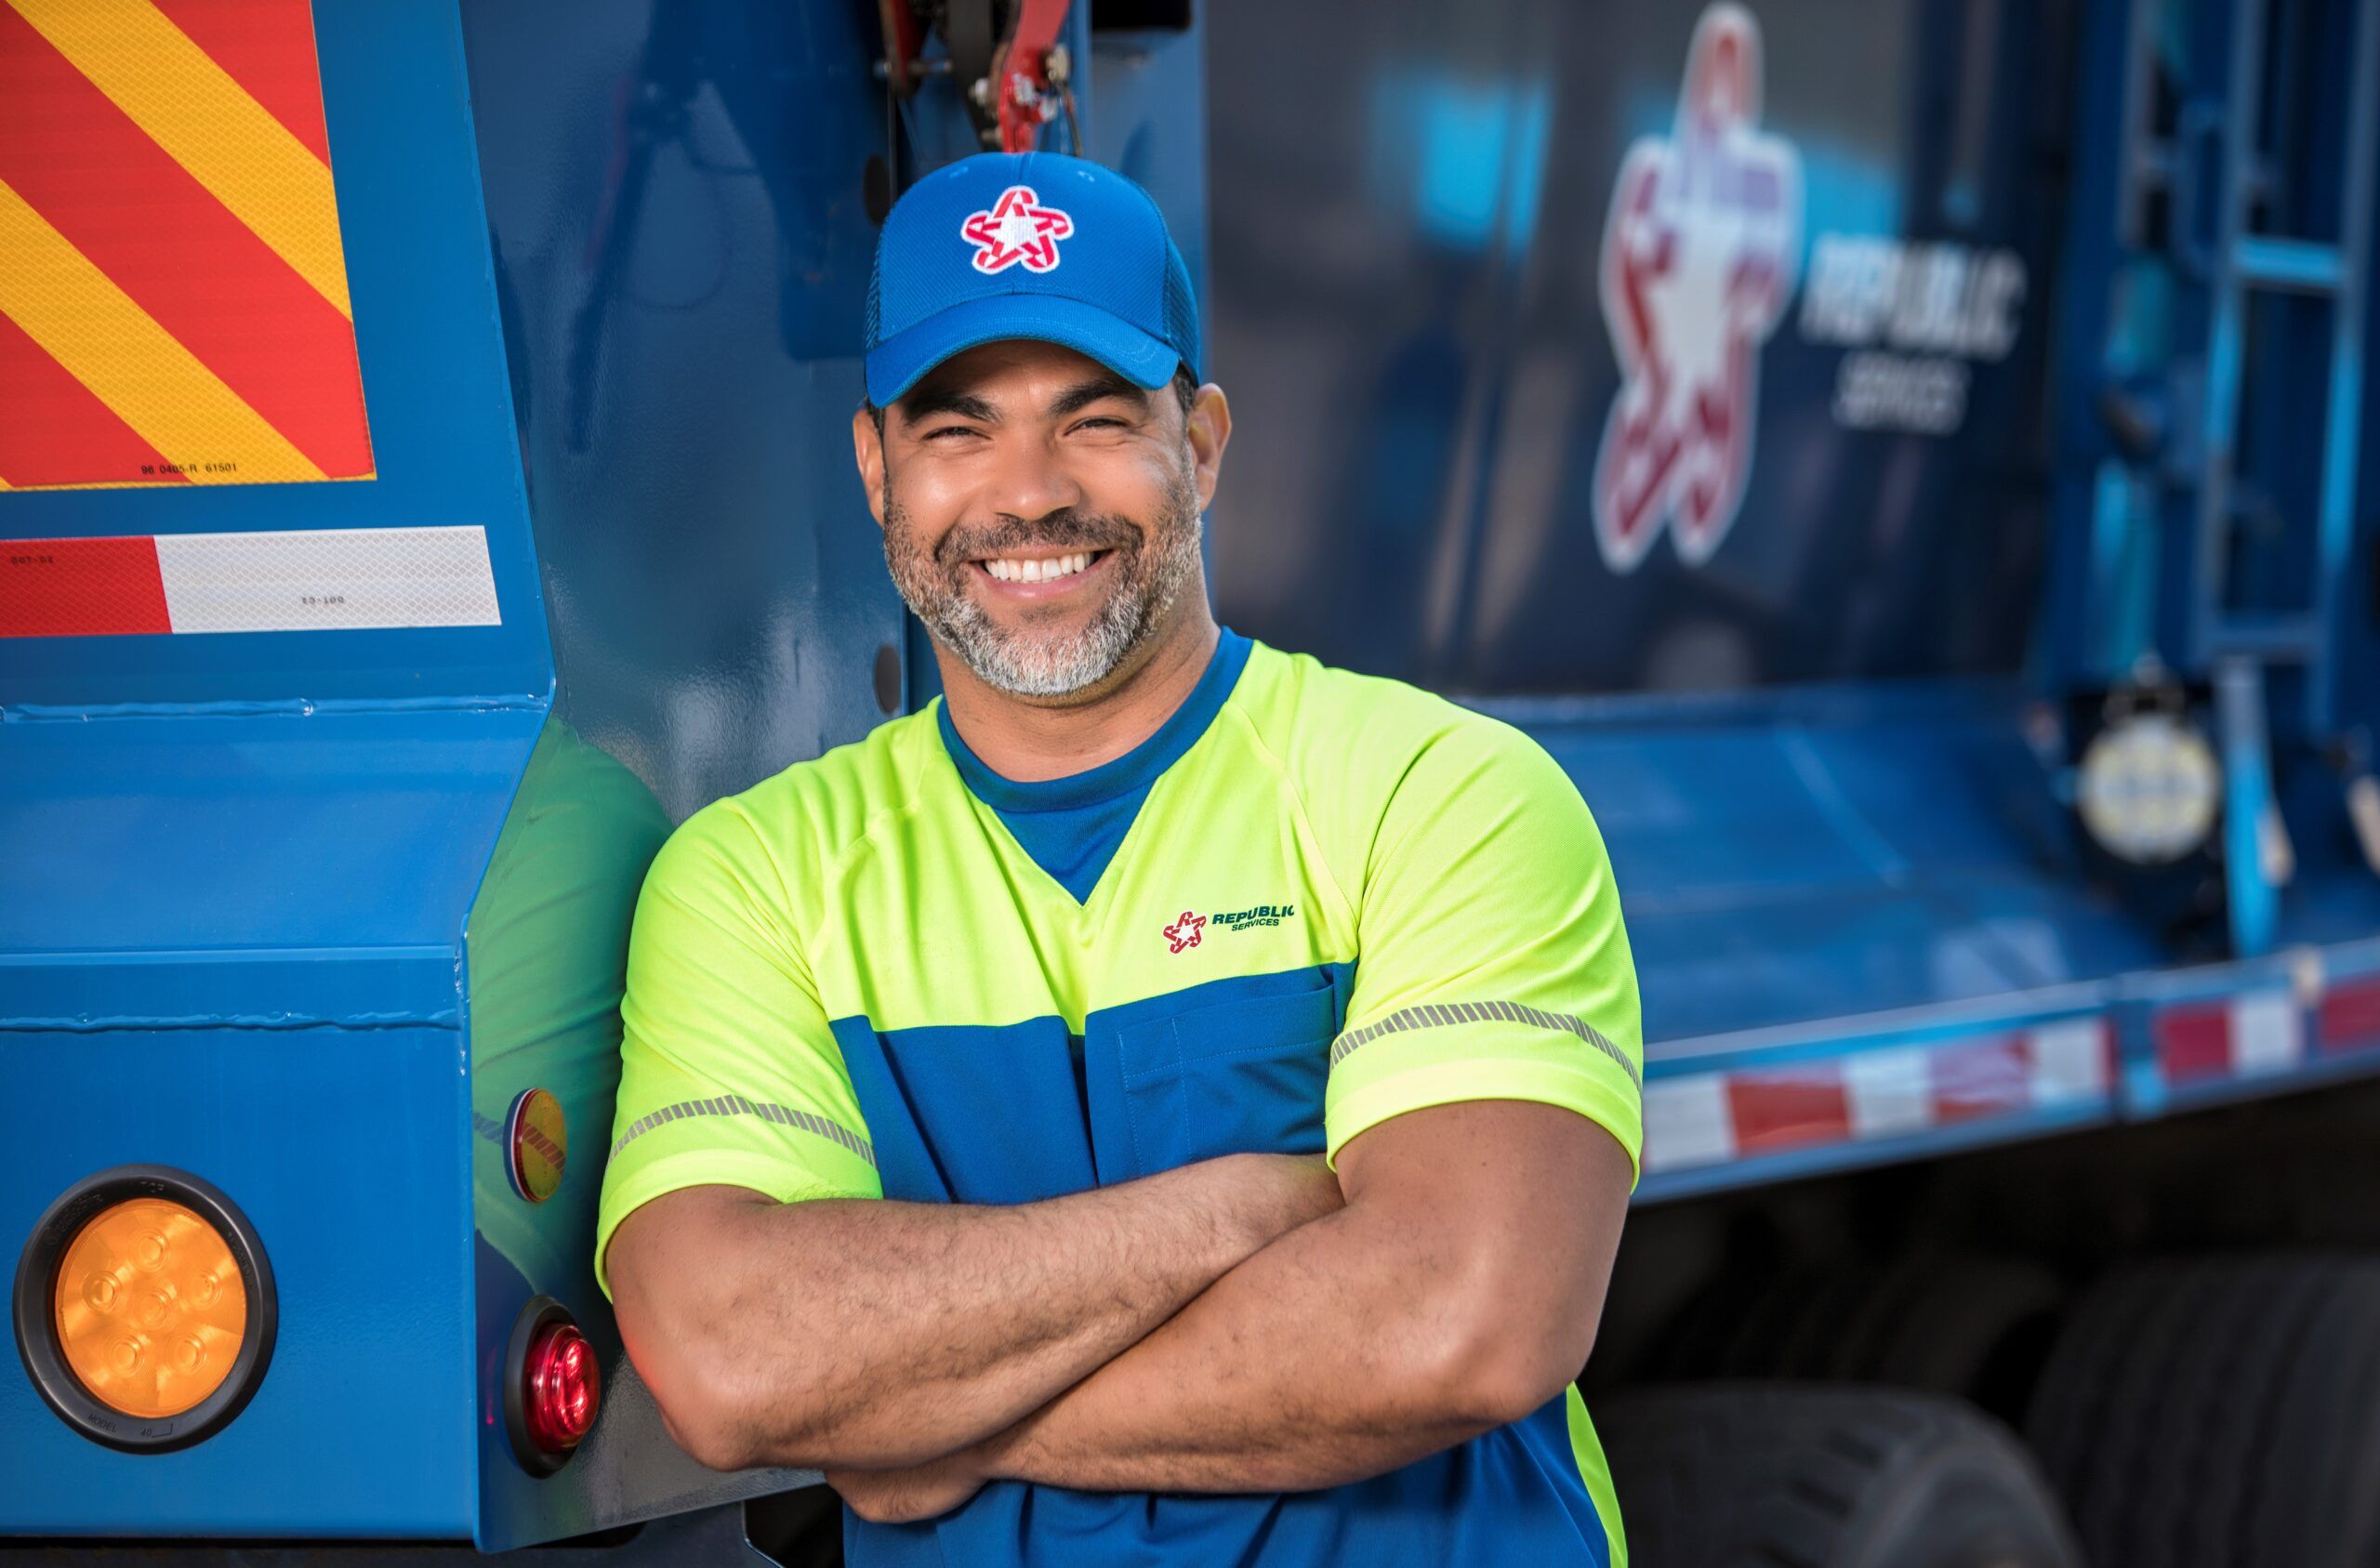 Republic Services driver leaning on a trash collection vehicle